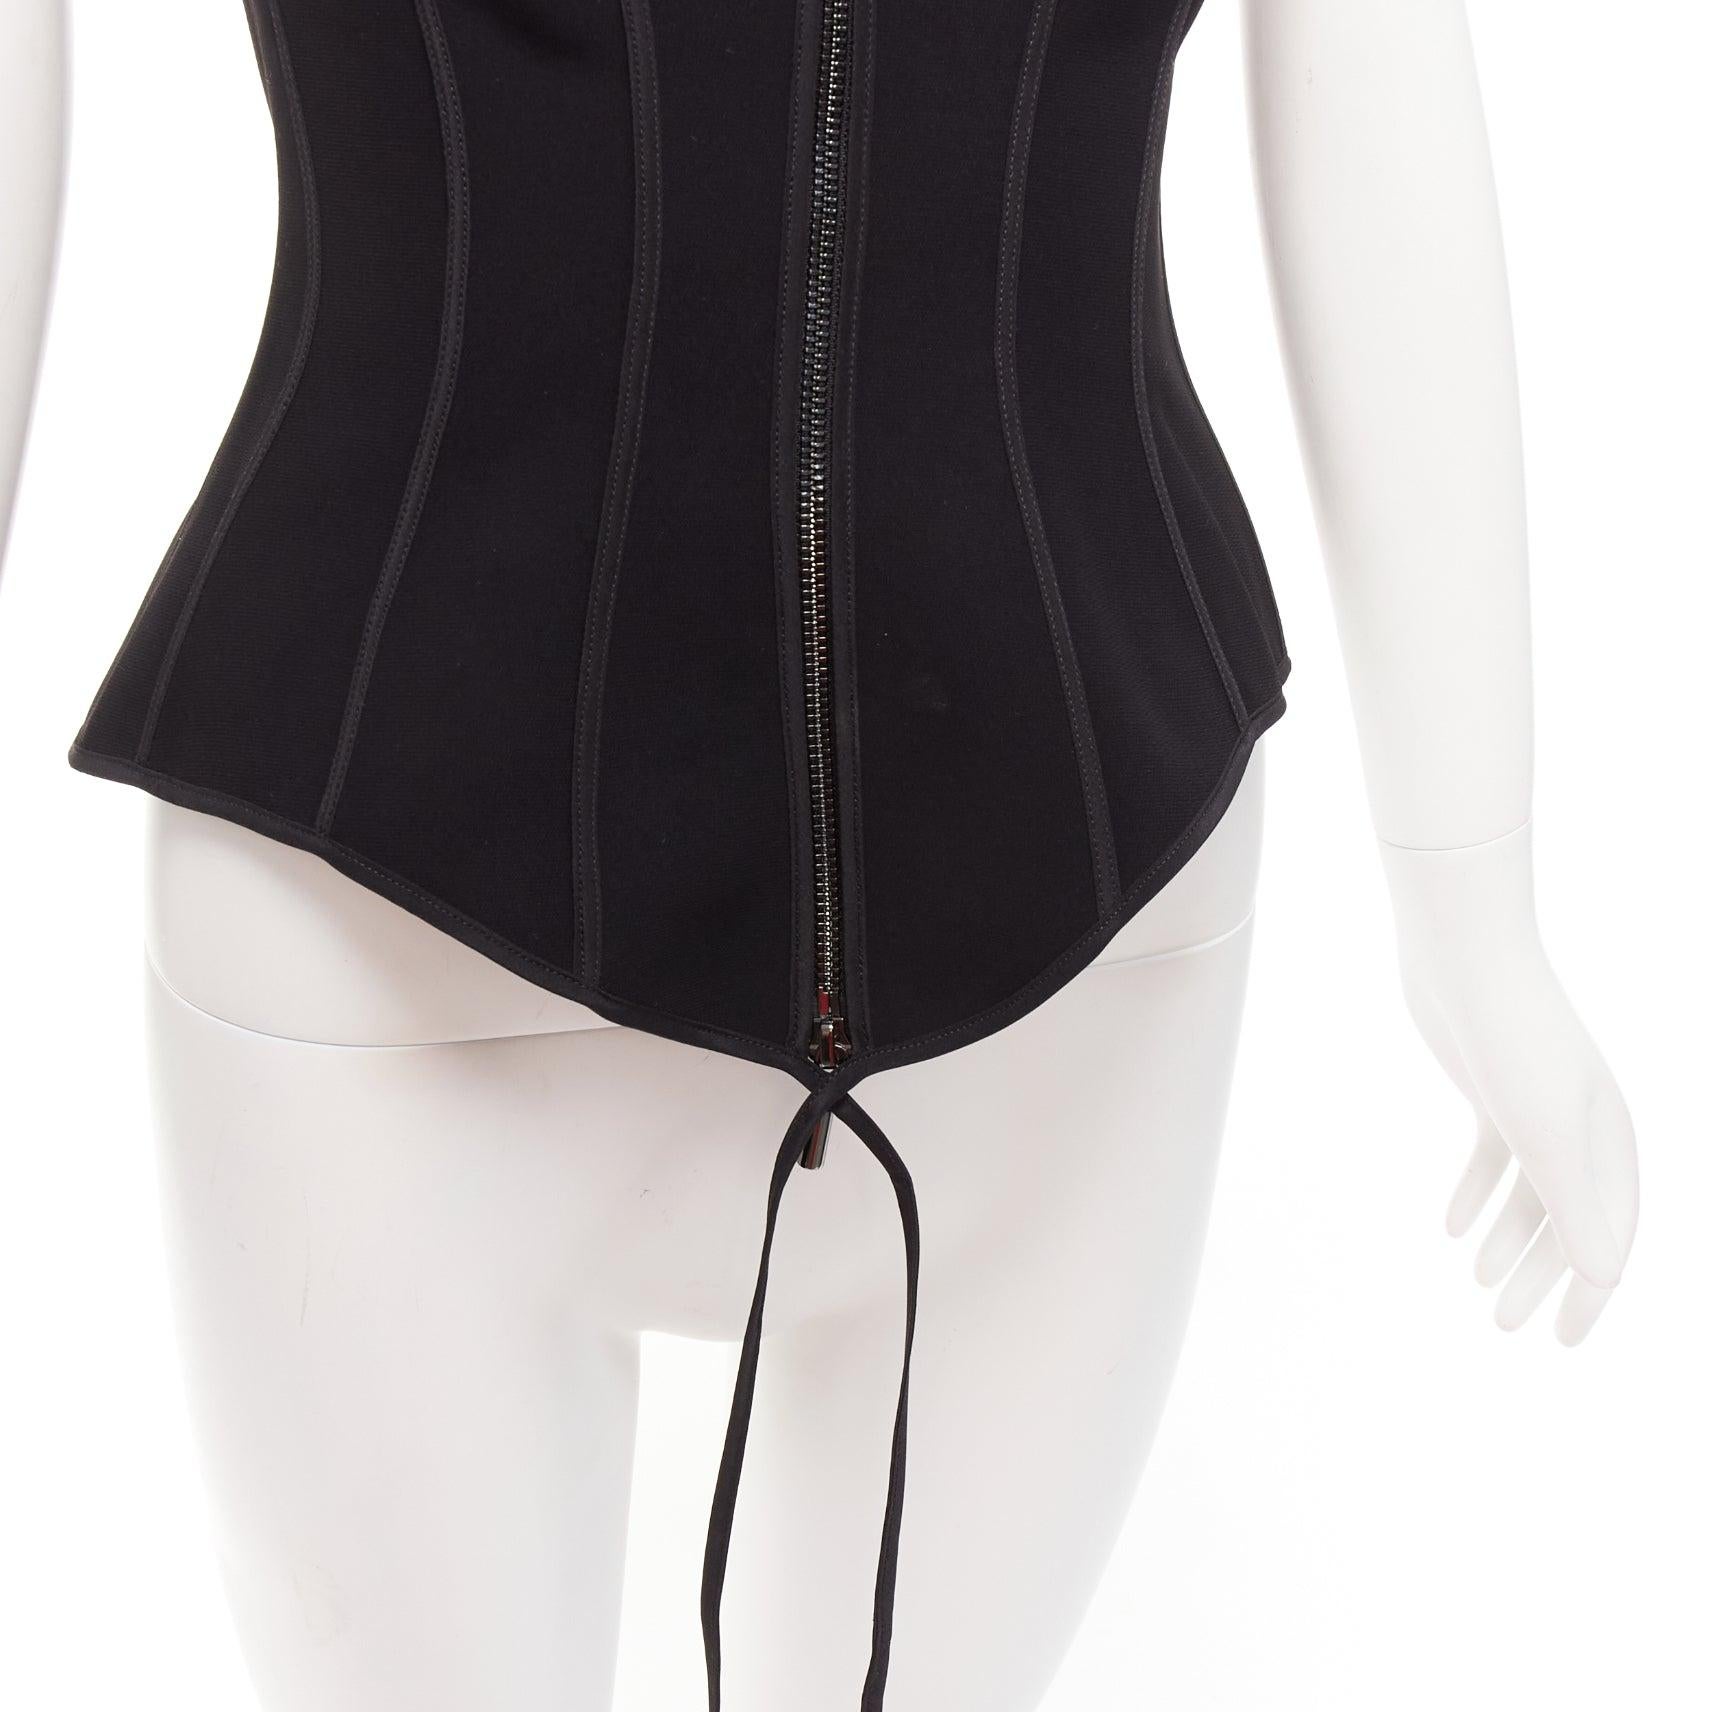 MATICEVSKI 2022 Fable Bustier black contour seam boned corset top AUS10 M
Reference: KEDG/A00320
Brand: Maticevski
Model: Fable Bustier
Collection: FW 2022
Material: Polyester
Color: Black, Silver
Pattern: Solid
Closure: Zip
Lining: Black